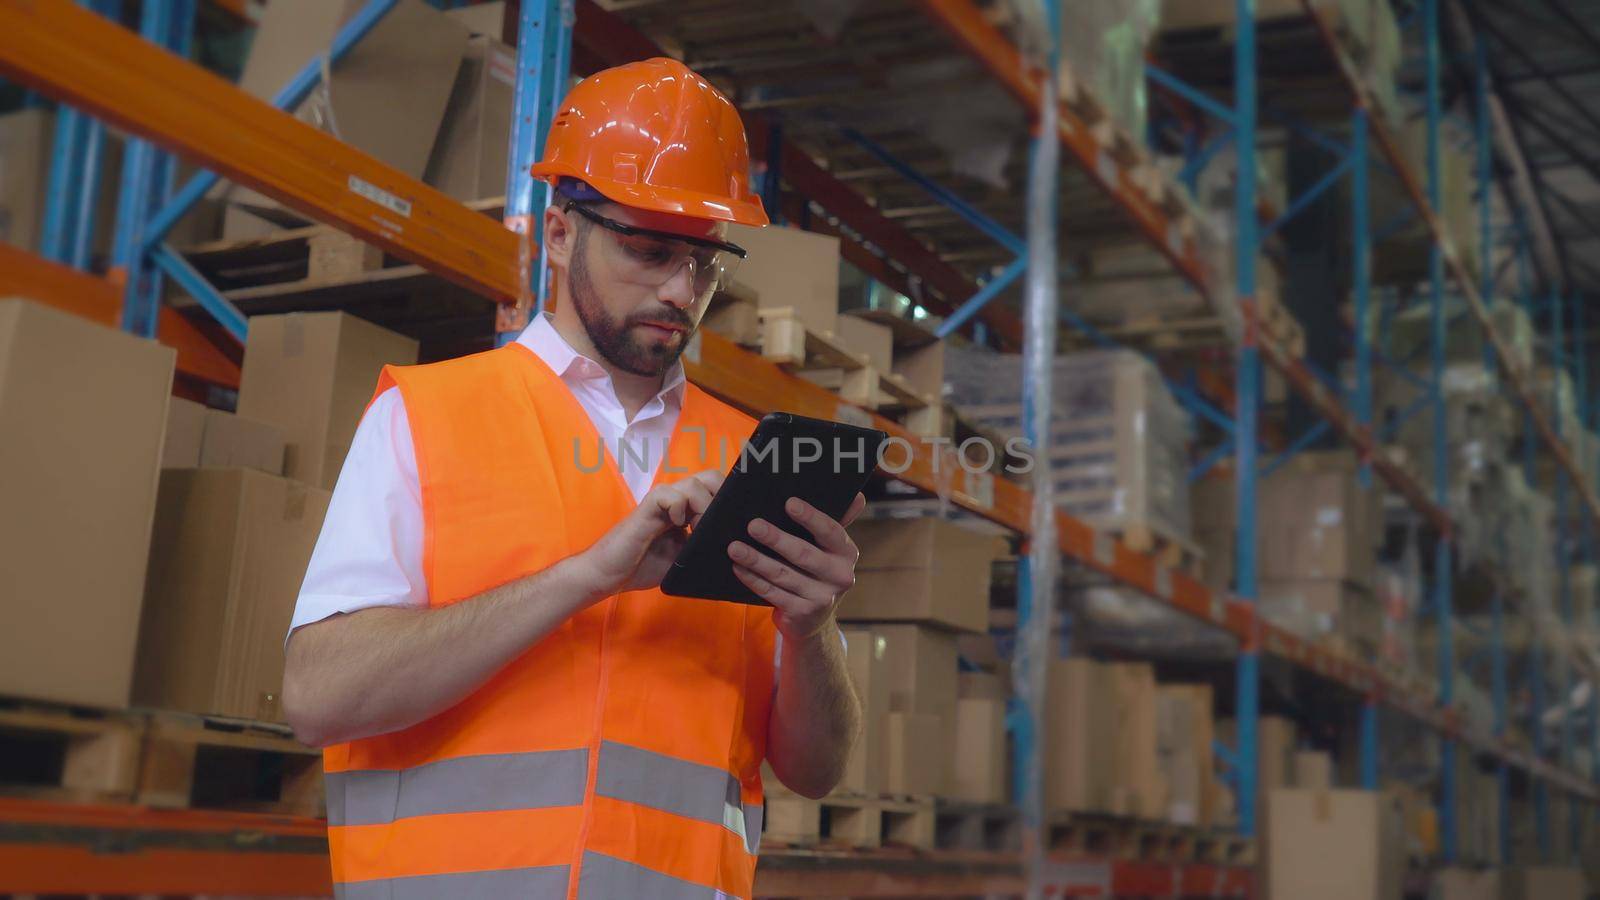 Manager at warehouse using digital touch screen tablet. Handsome worker entering data. Adult man at work in storehouse.